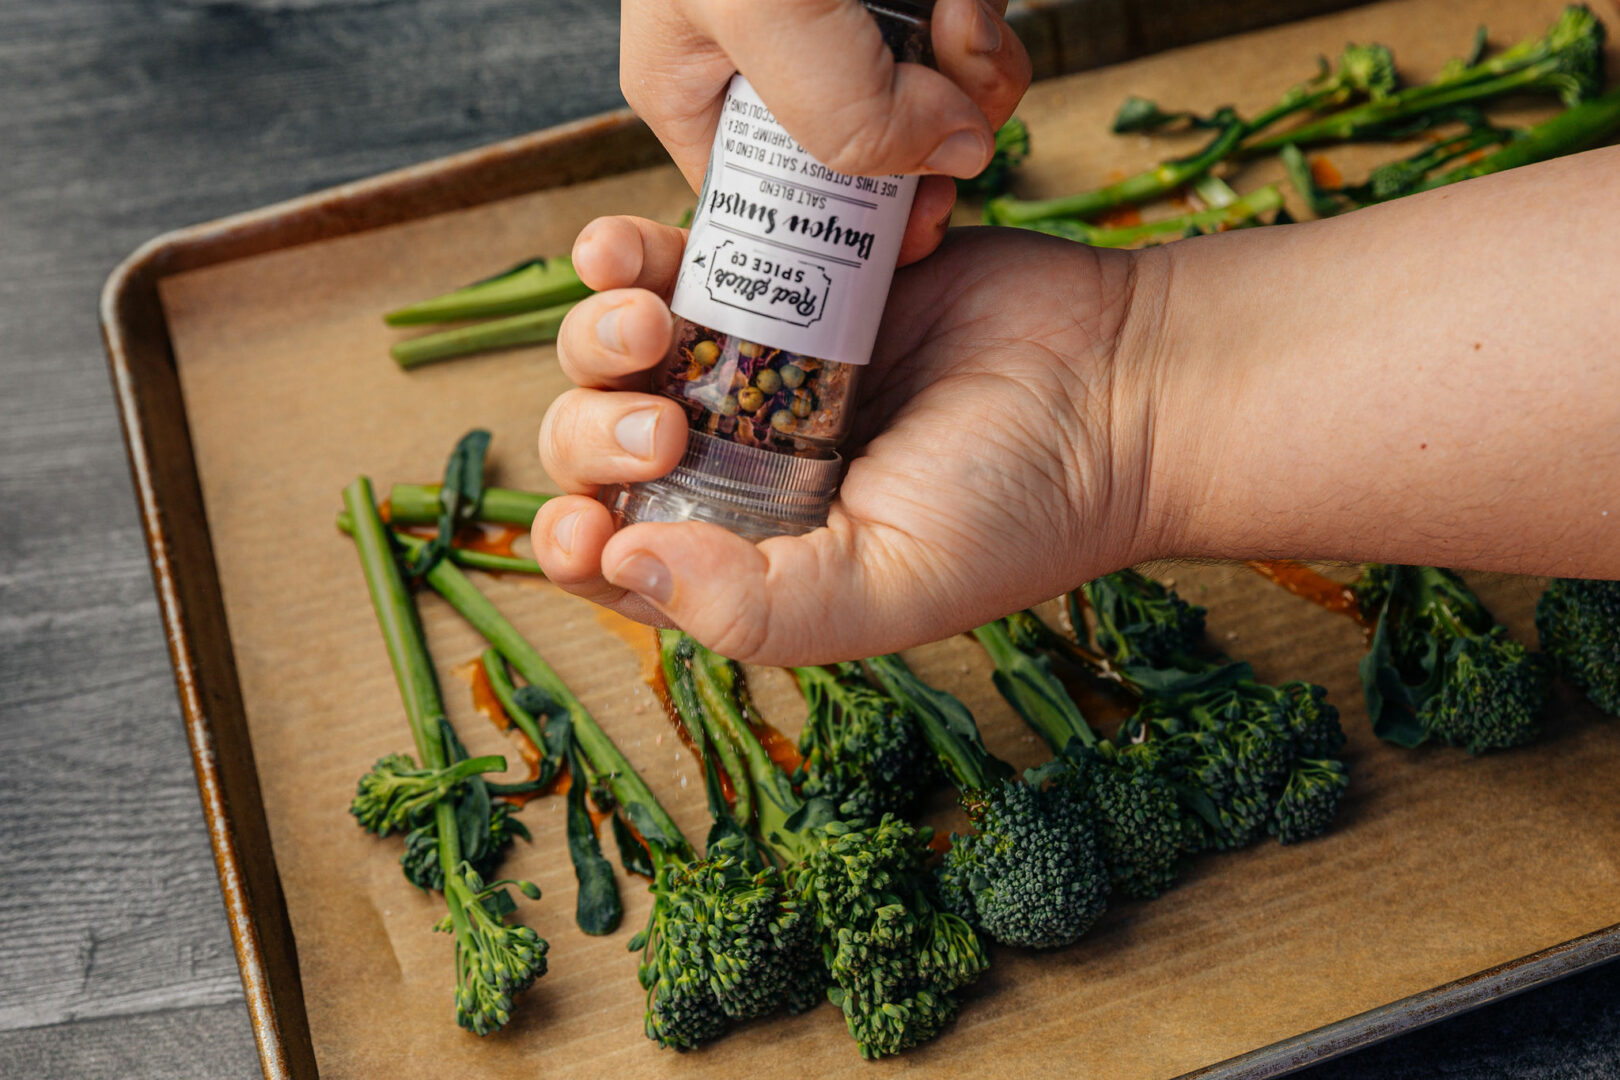 Blistered Broccolini with Whipped Cashew Sambal Sauce